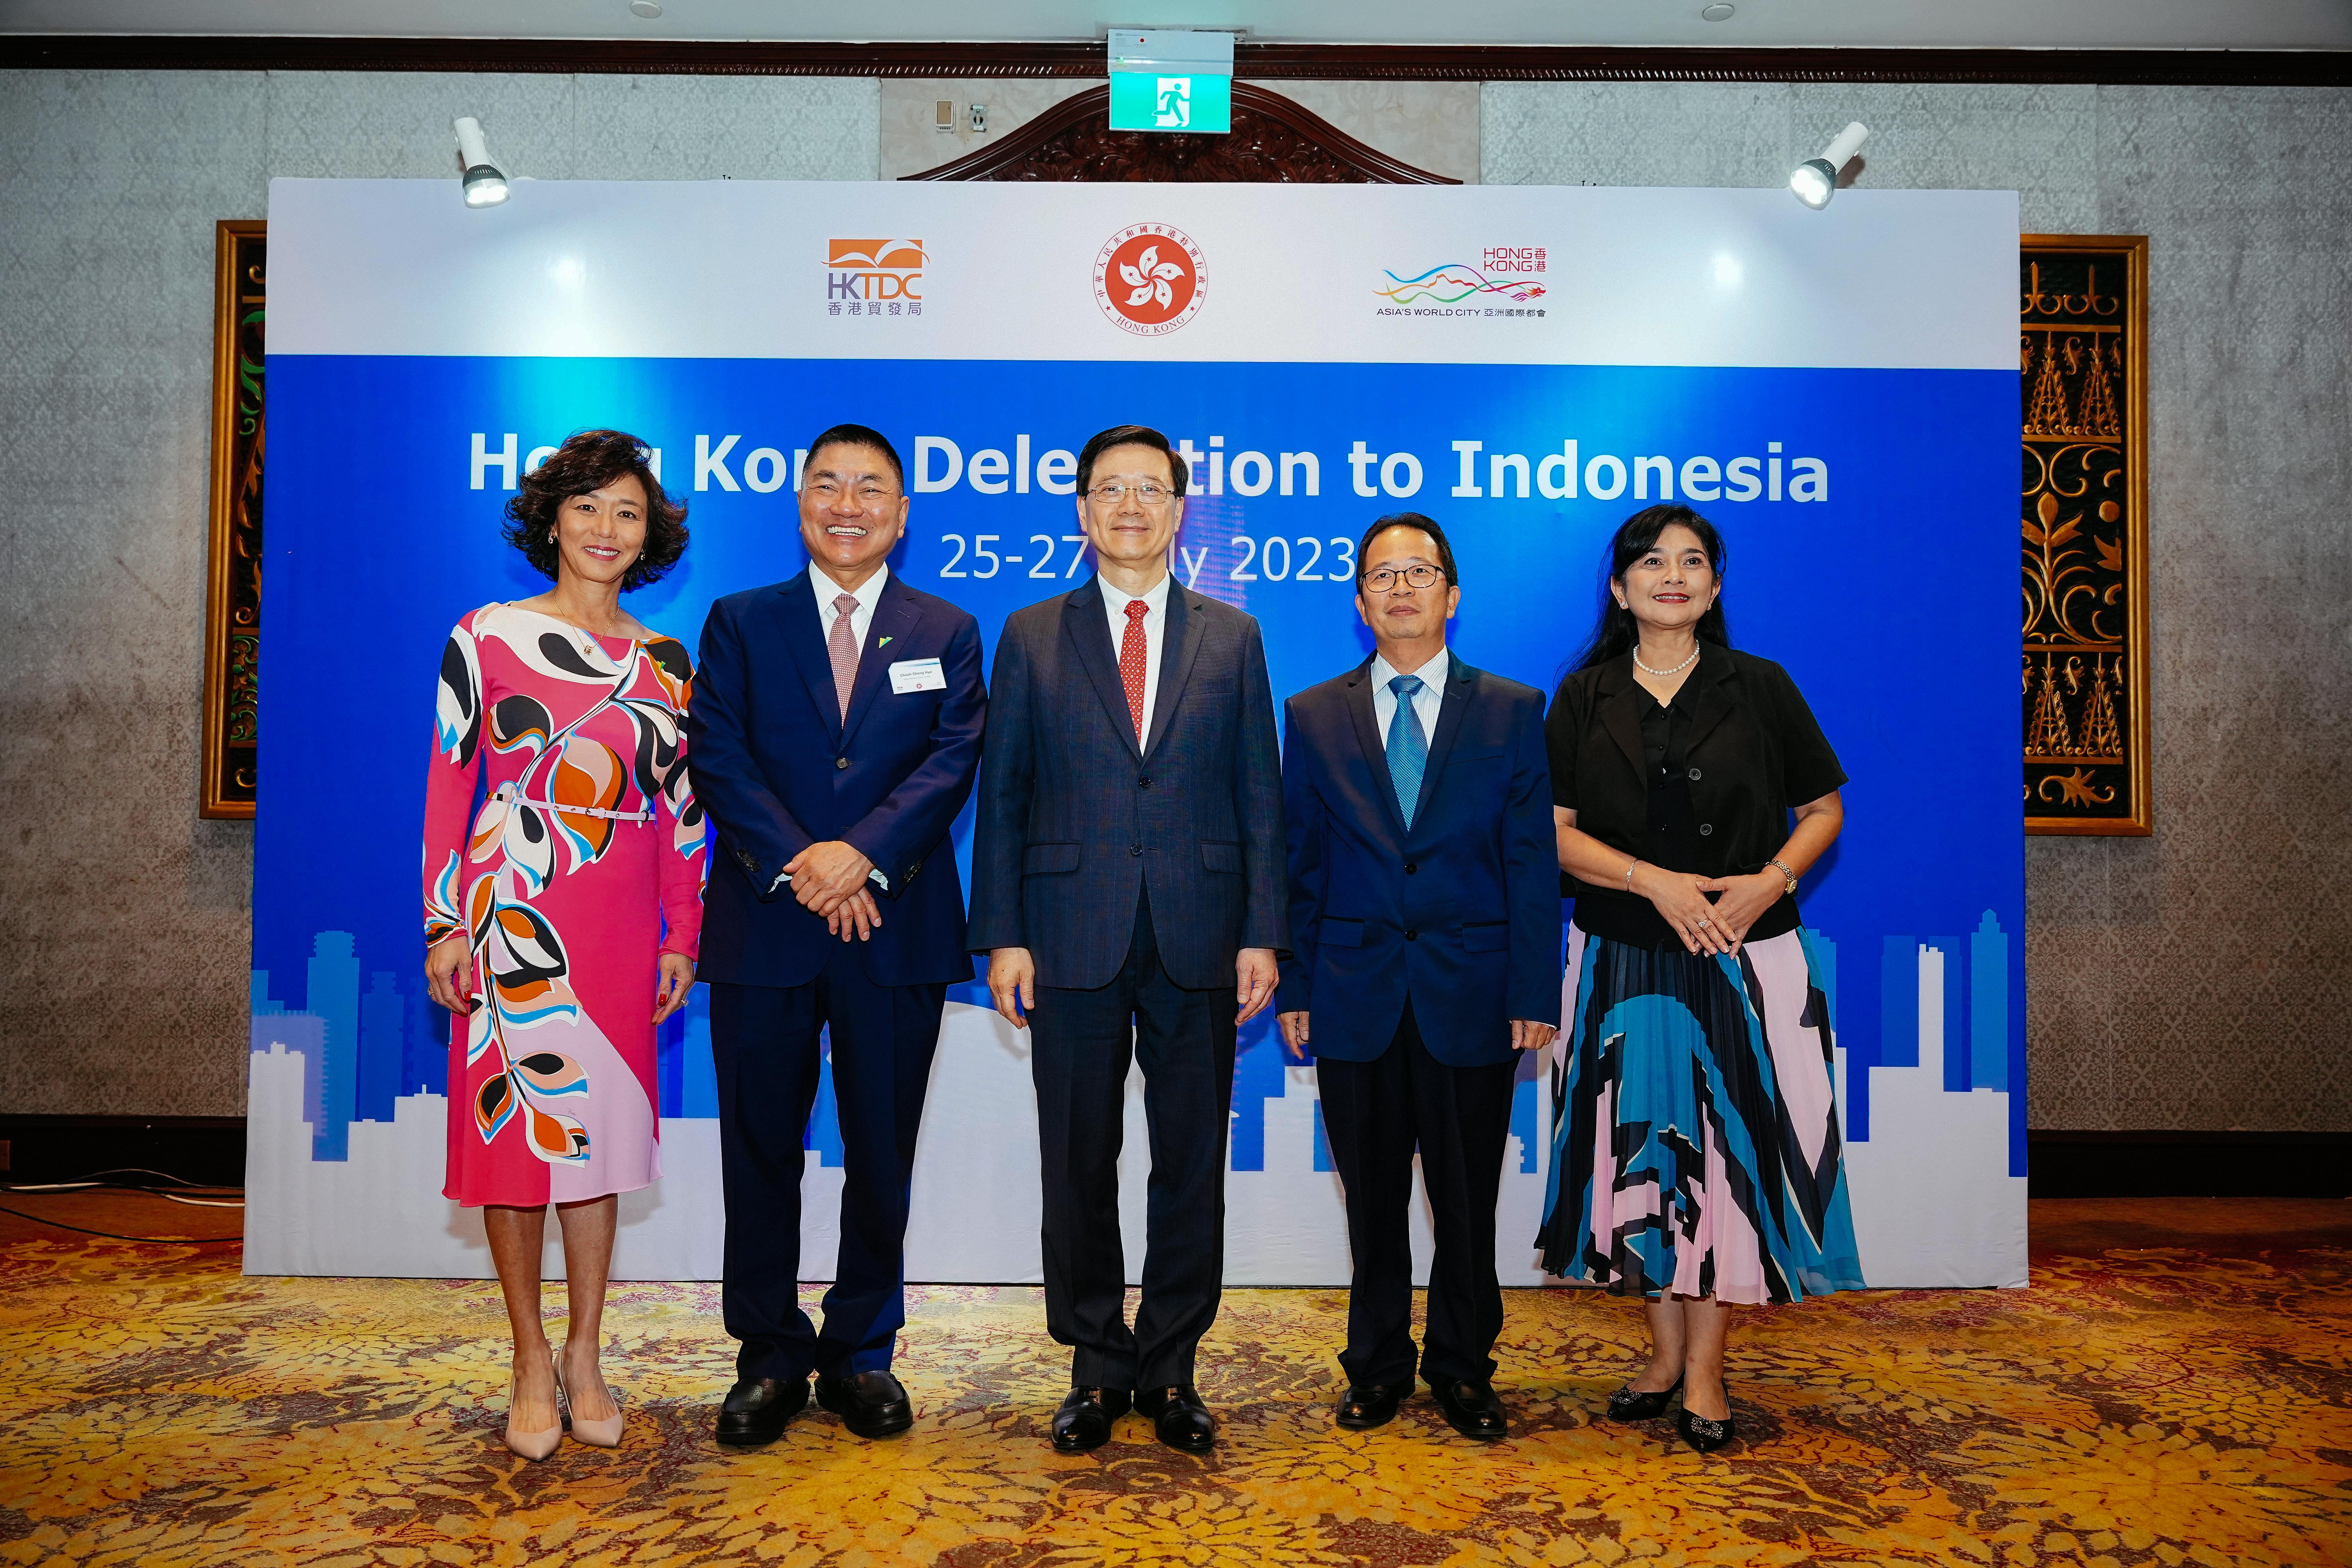 The Chief Executive, Mr John Lee (centre), together with Dato’ Seri Cheah Cheng Hye, Co-chairman and Co-CIO of Value Partners (left two), Ms June Wong, CEO of Value Partners (left one), Mr Rudy Utomo, President Director, Aldiracita Sekuritas (right two) and Mrs Reita Farianti, President Director, Star Asset Management (right one)